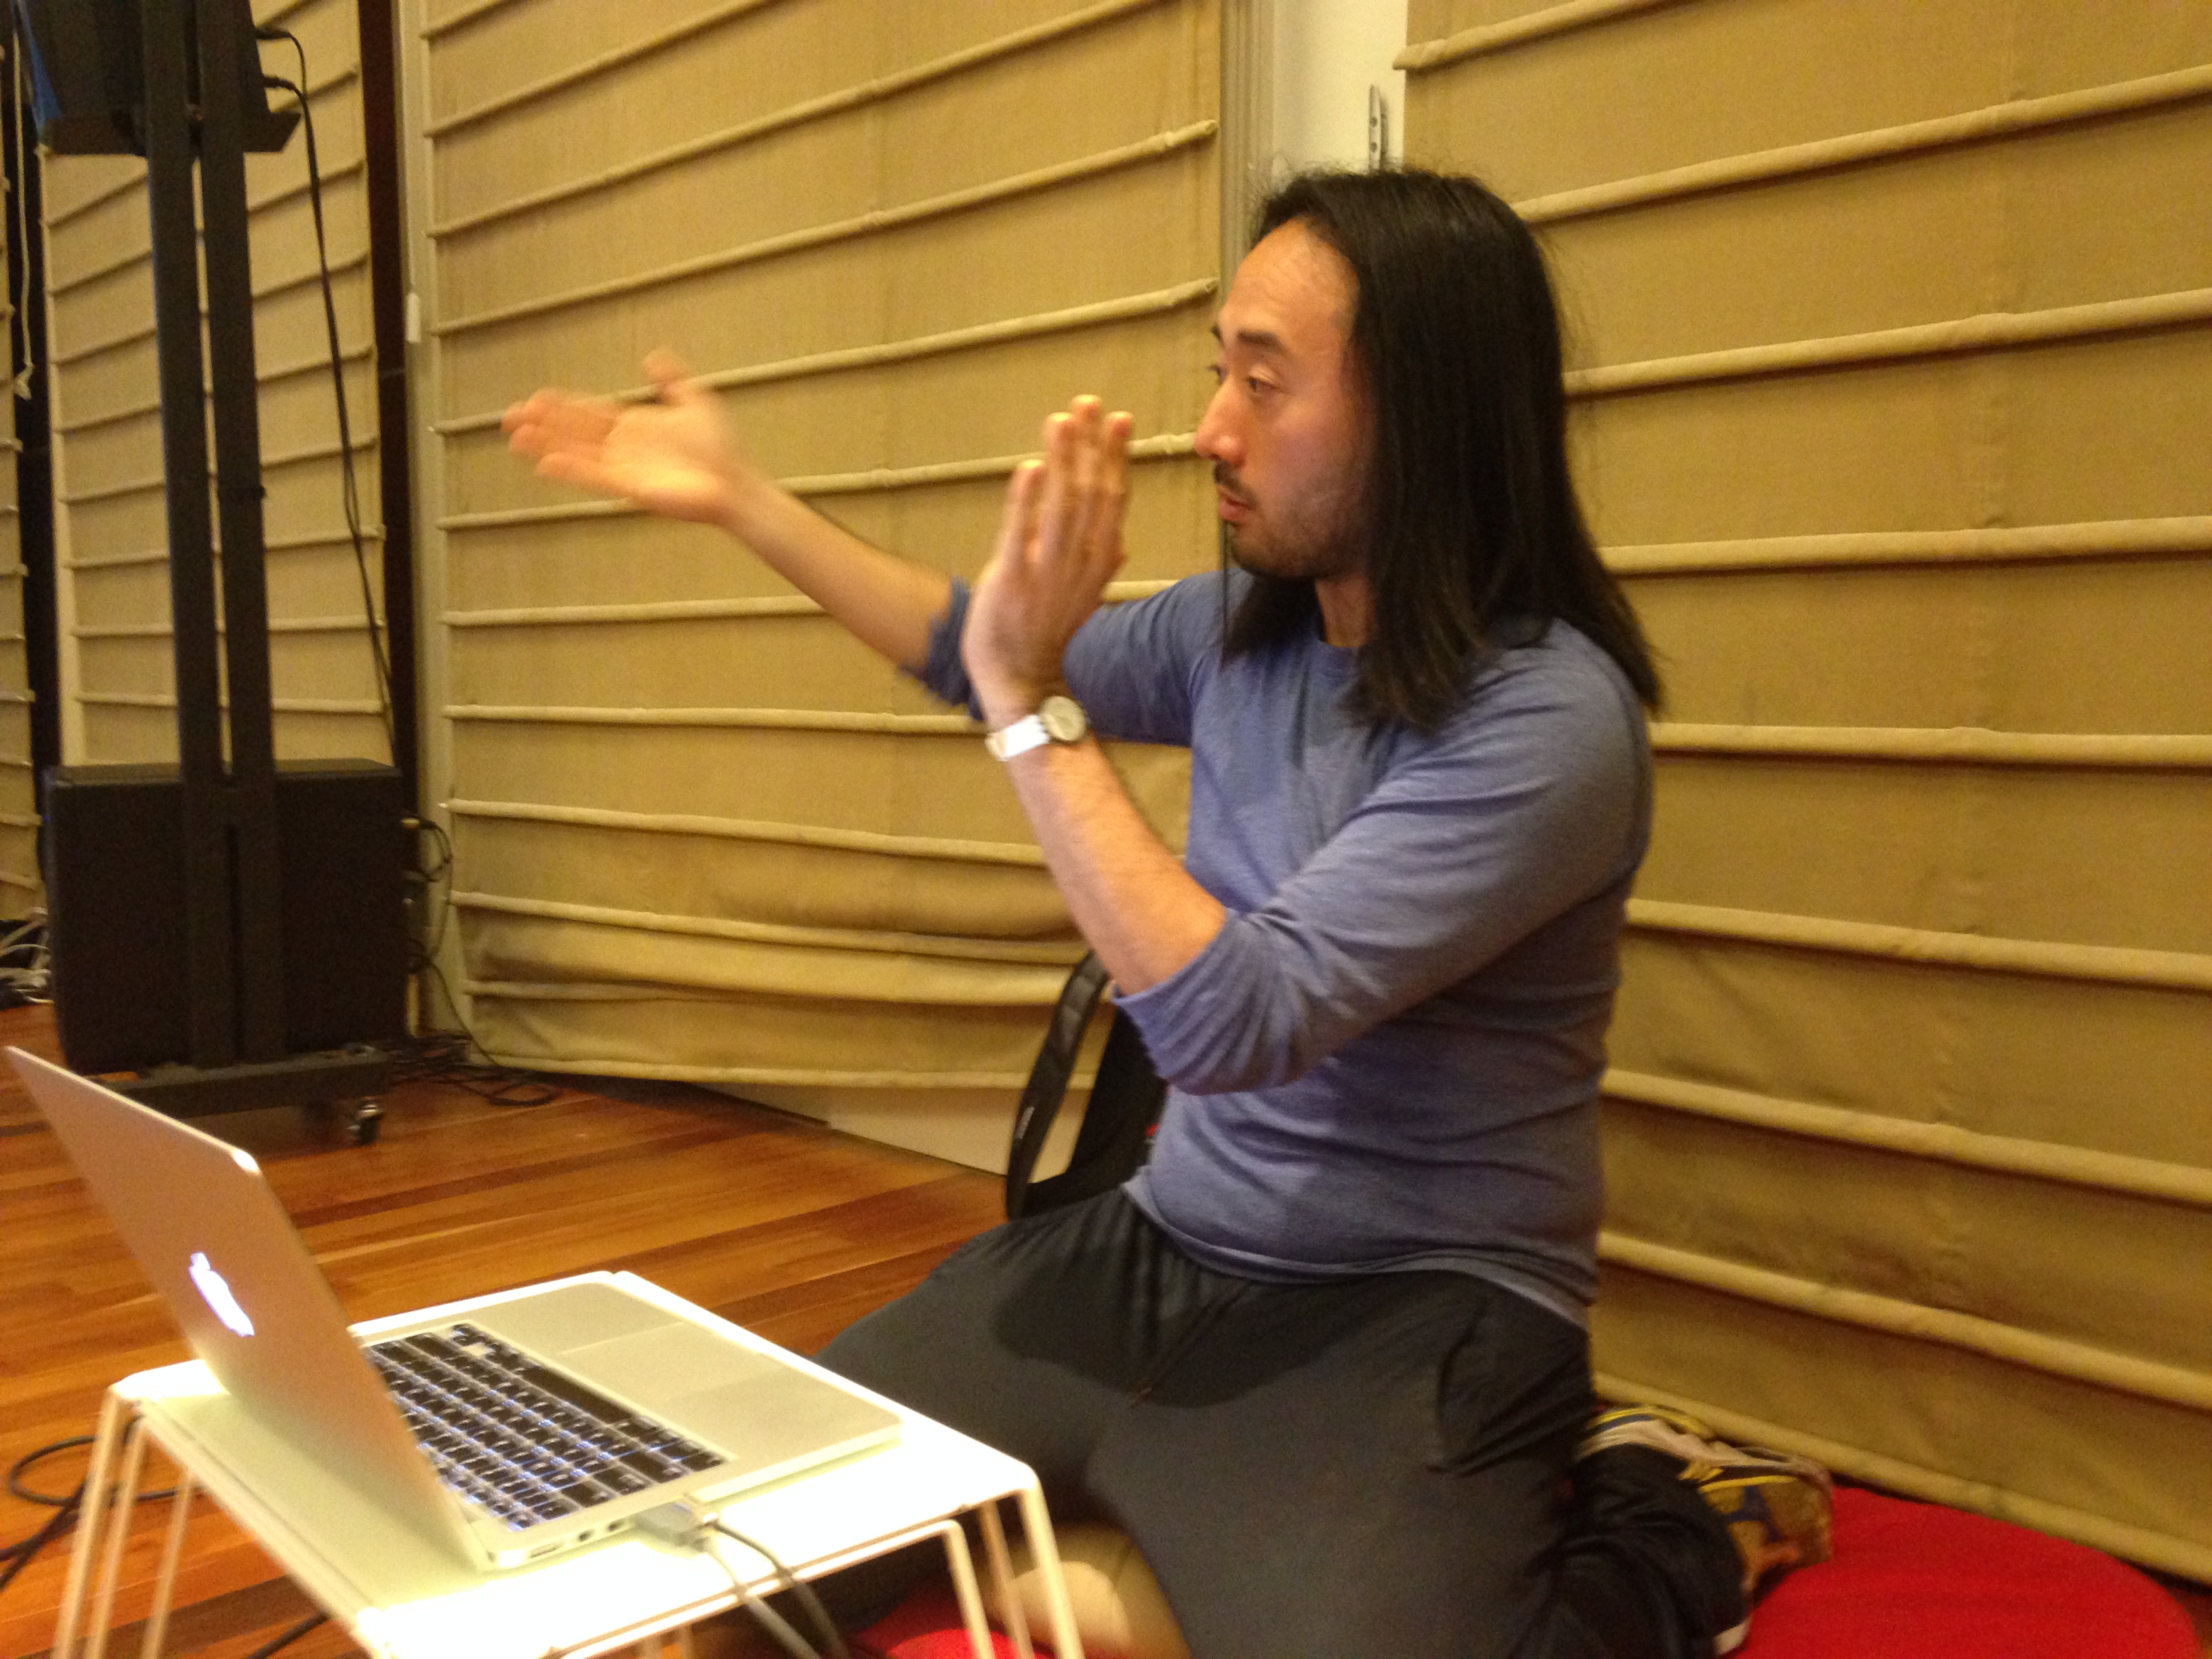 Ge Wang, assistant professor of music at Stanford's Center for Computer Research in Music and Acoustics, teaches a music coding lesson to students participating in the Stanford Laptop Orchestra.